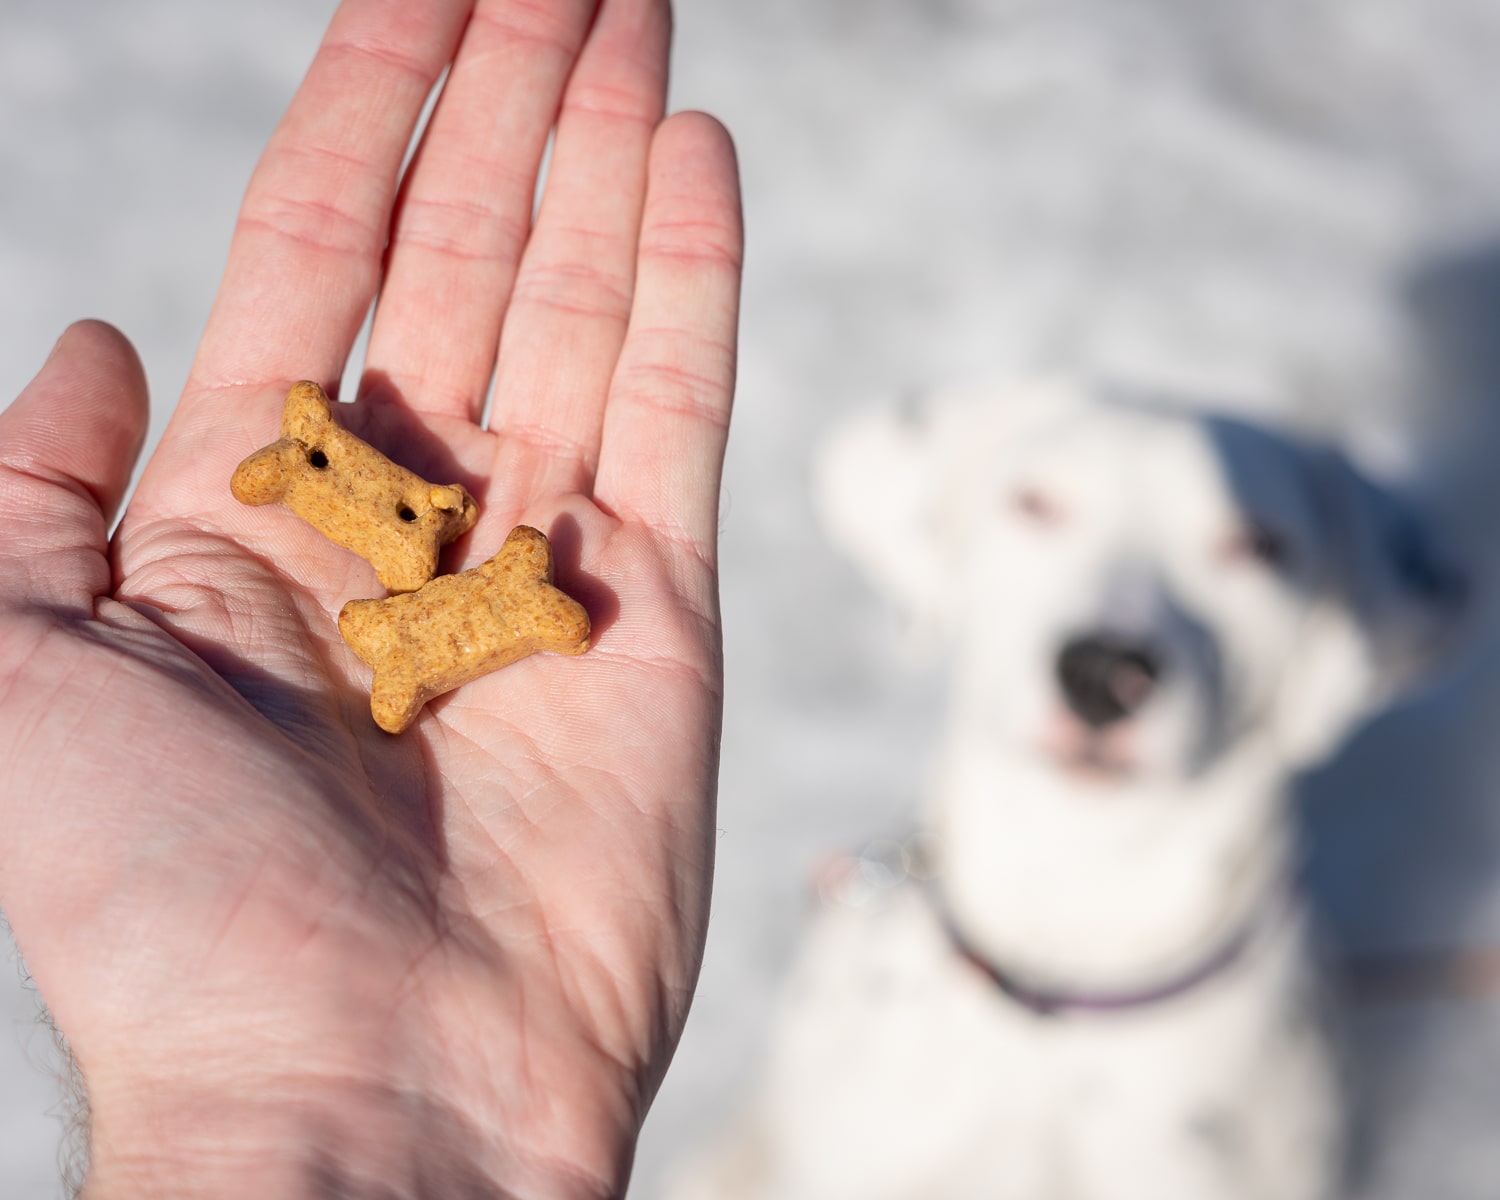 Owner using a CBD dog treat to relax their dogs anxiety